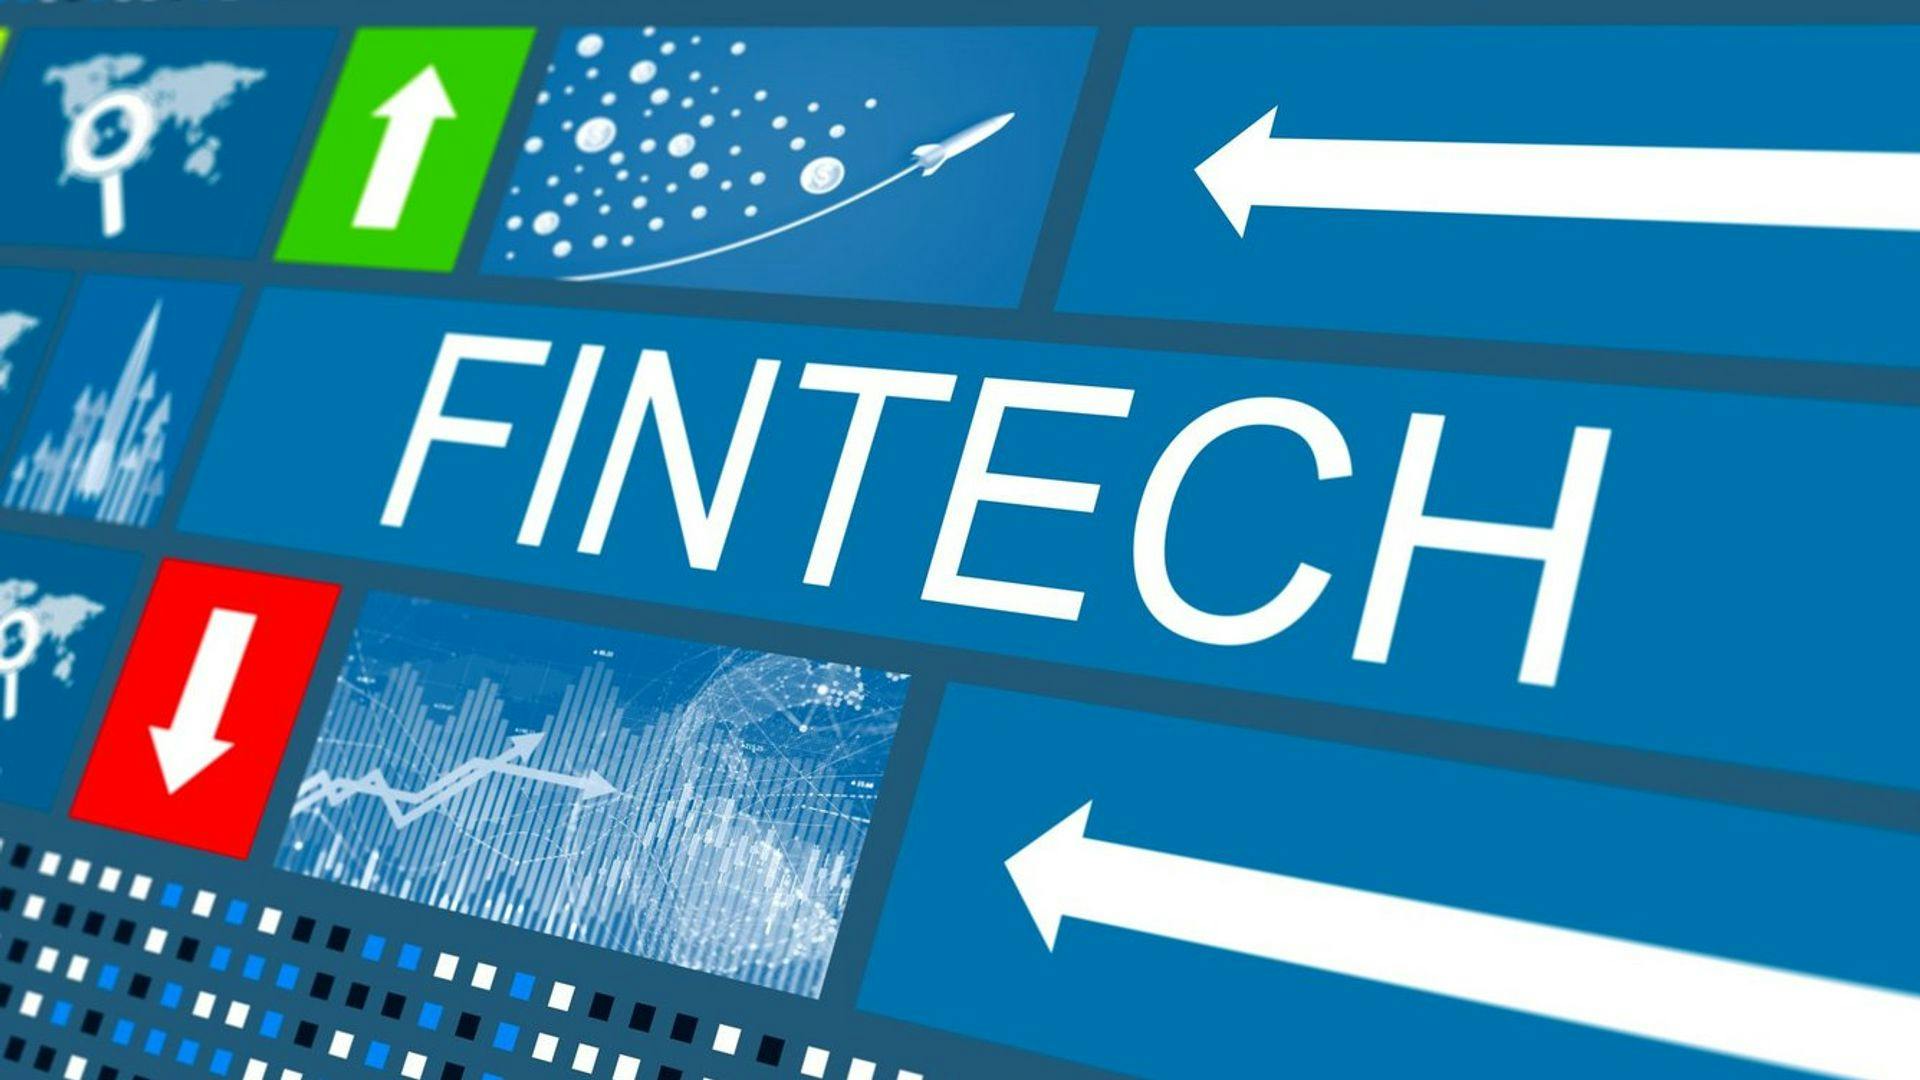 How Fintech will disrupt Wealth Management in the future